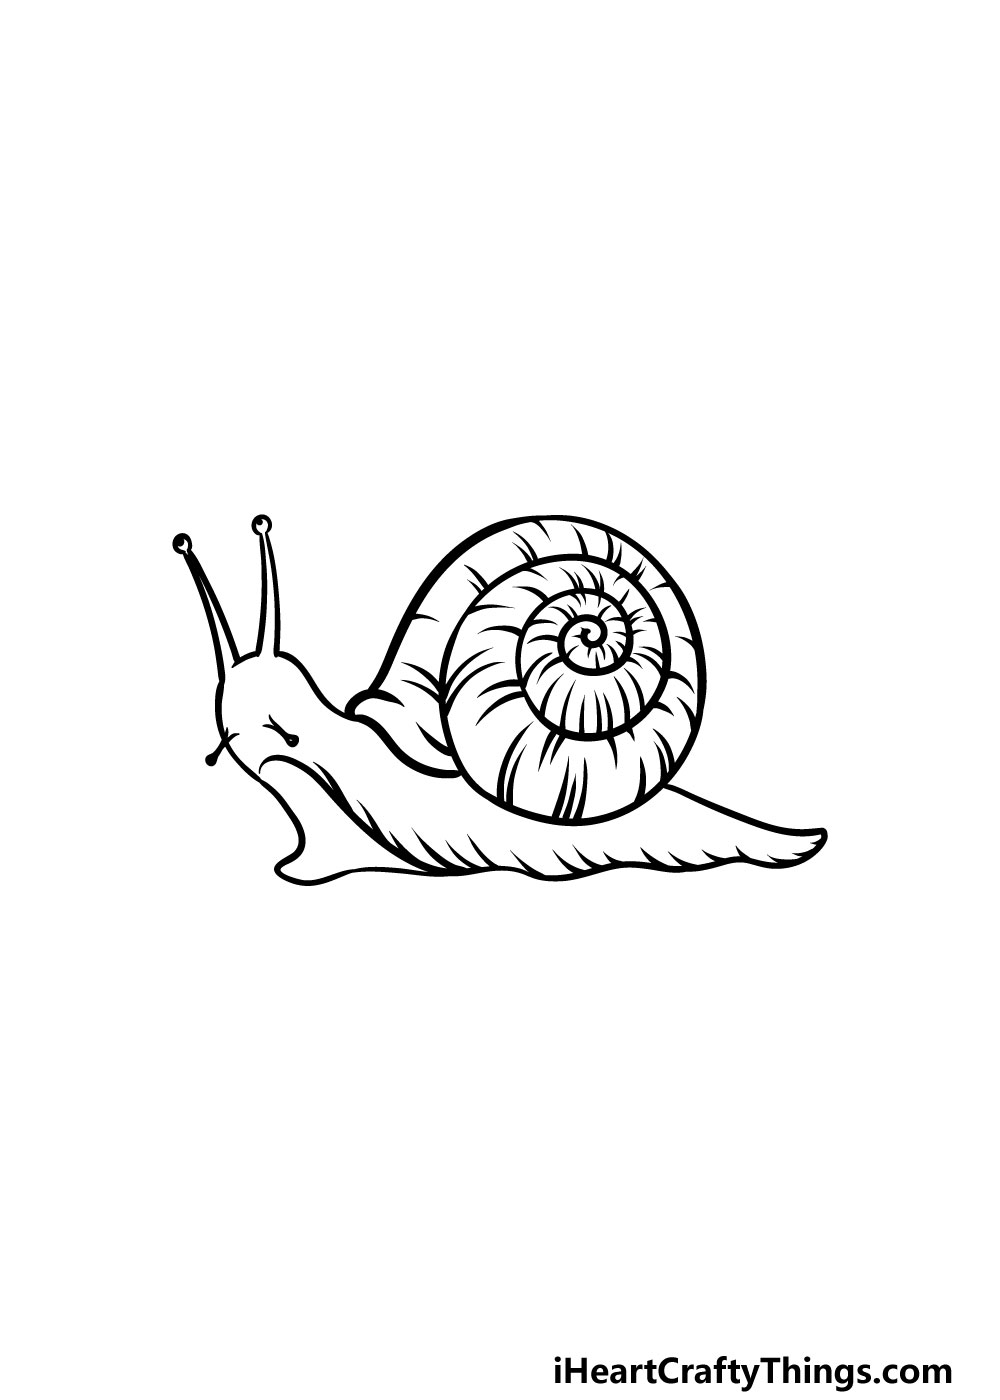 drawing a snail step 7